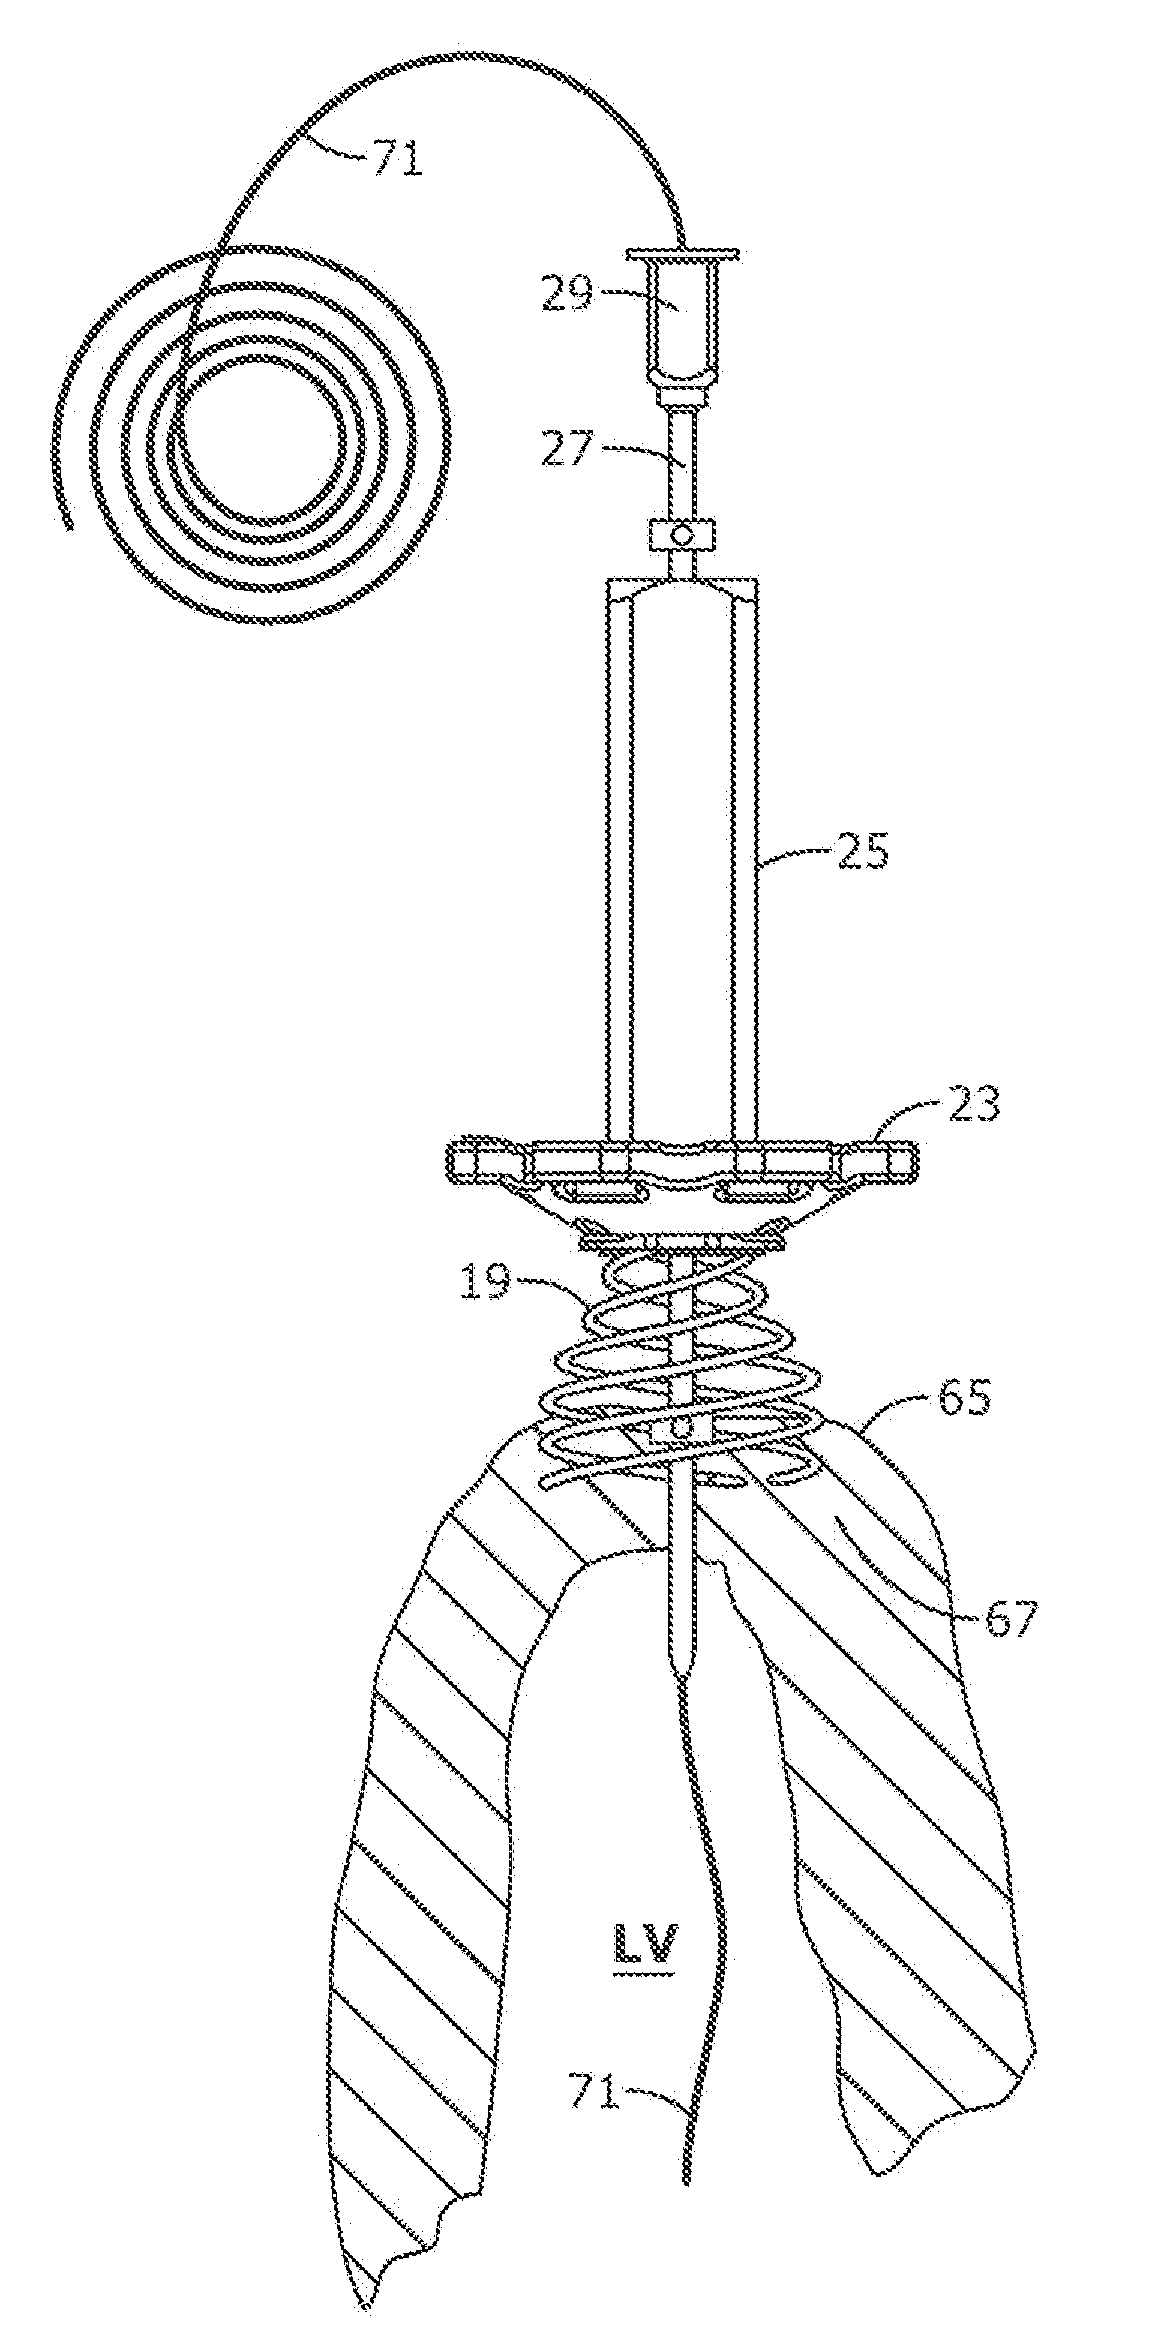 Device for creating temporary access and then closure